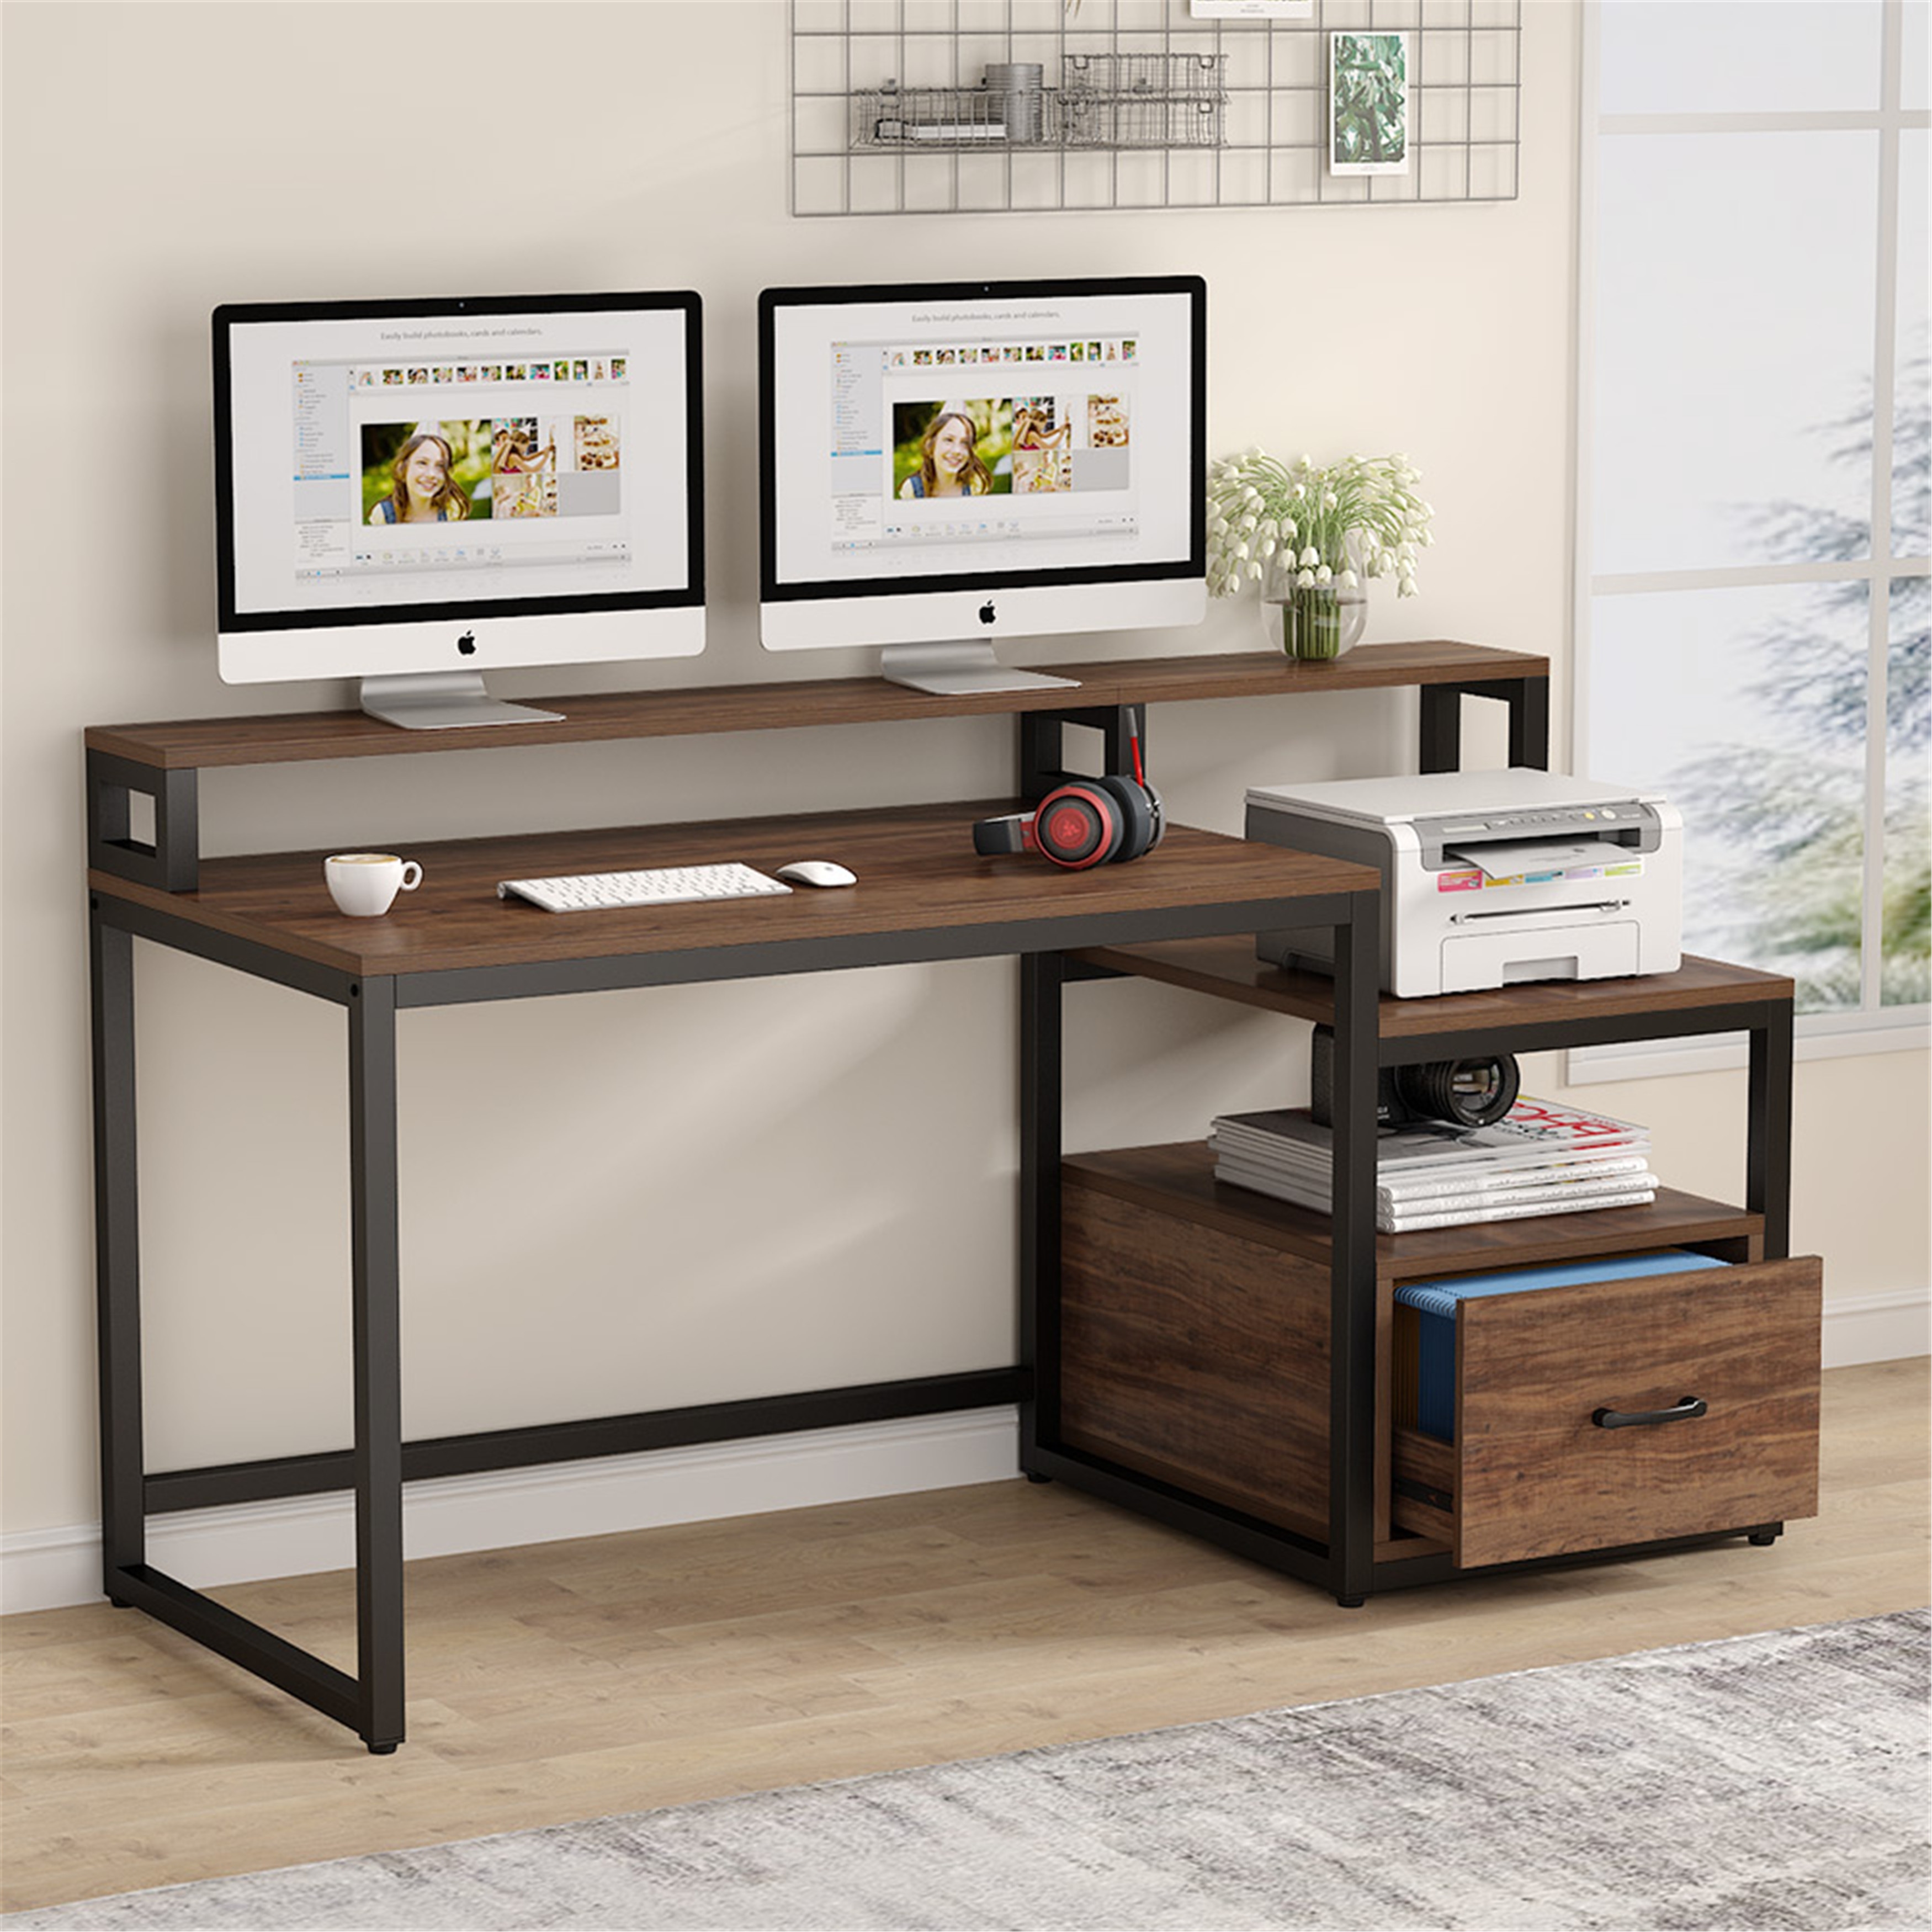 Details about   Computer Desk Shelf Drawer PC Laptop Table Workstation Home Office With Cabinet 